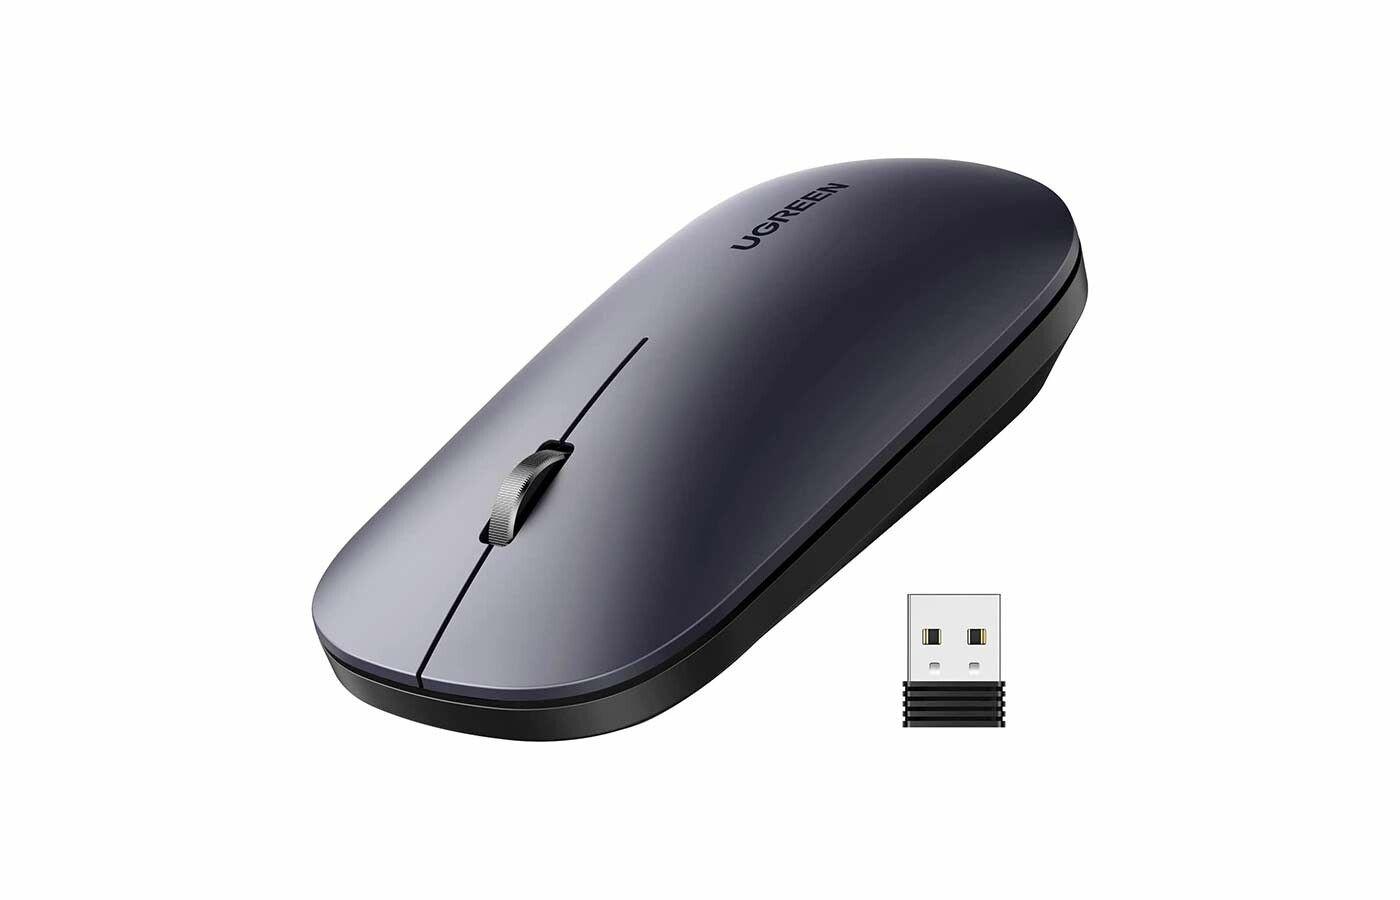 UGREEN Portable Wireless Mouse 90372